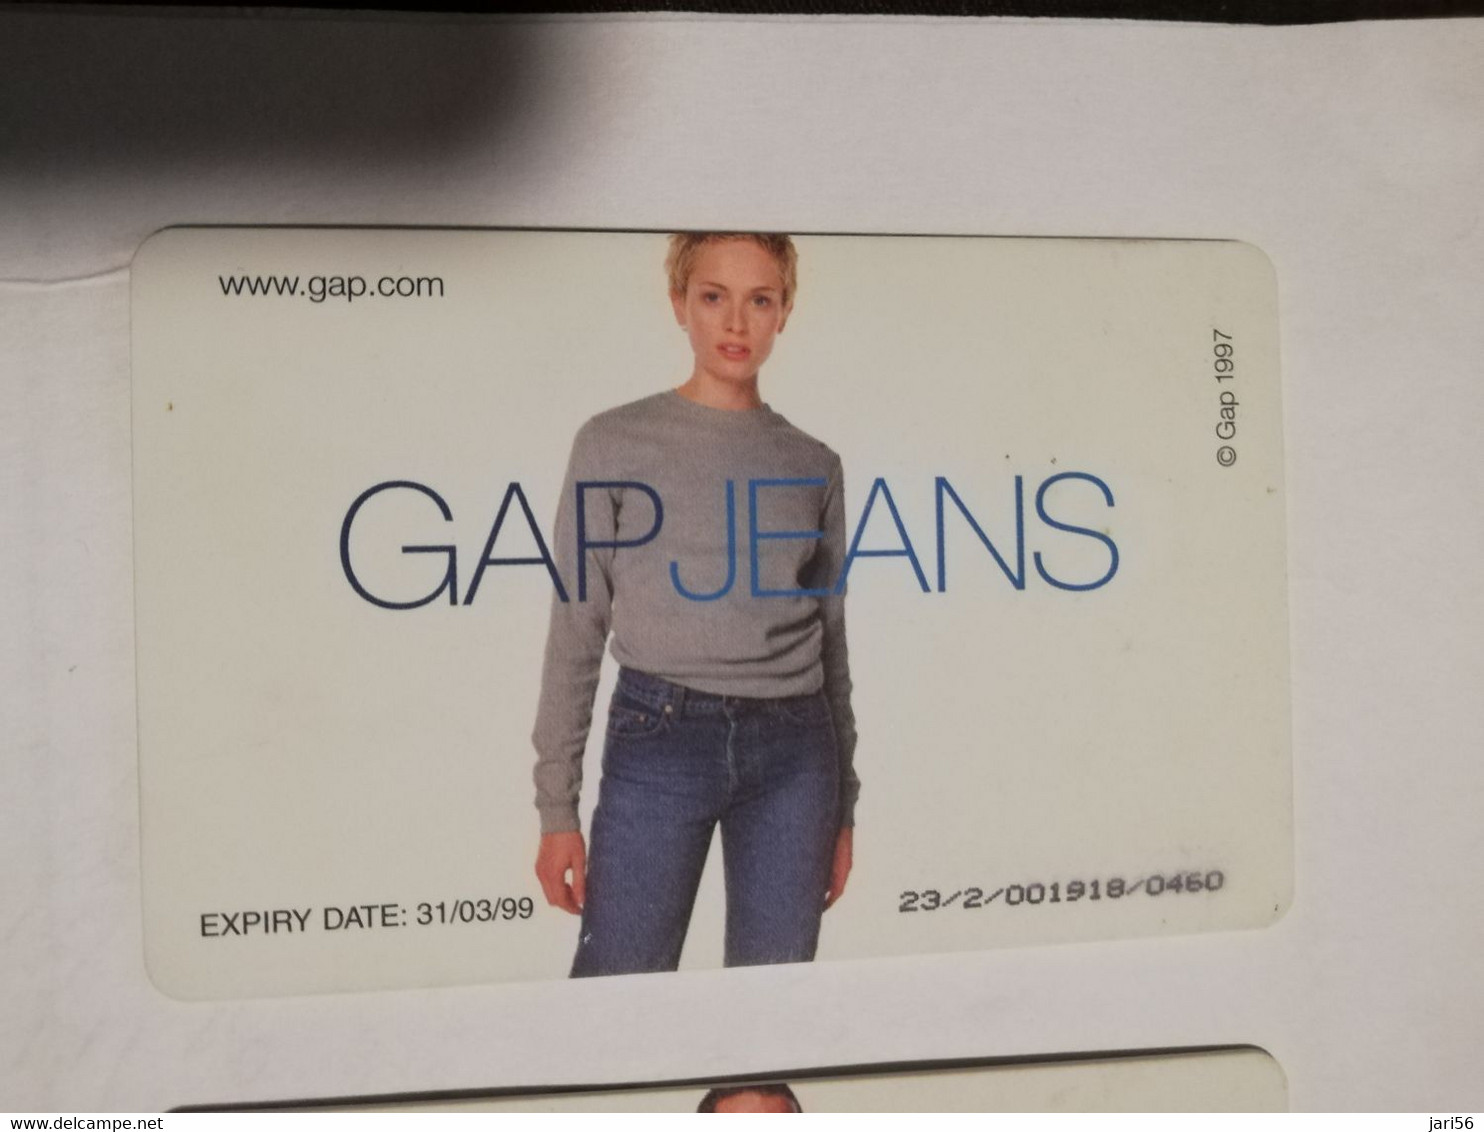 GREAT BRETAGNE 1x 5 POUND 2X 10 POUND  GAP JEANS   SPECIAL EDITION   PERFECT  CONDITION     **4824** - BT General